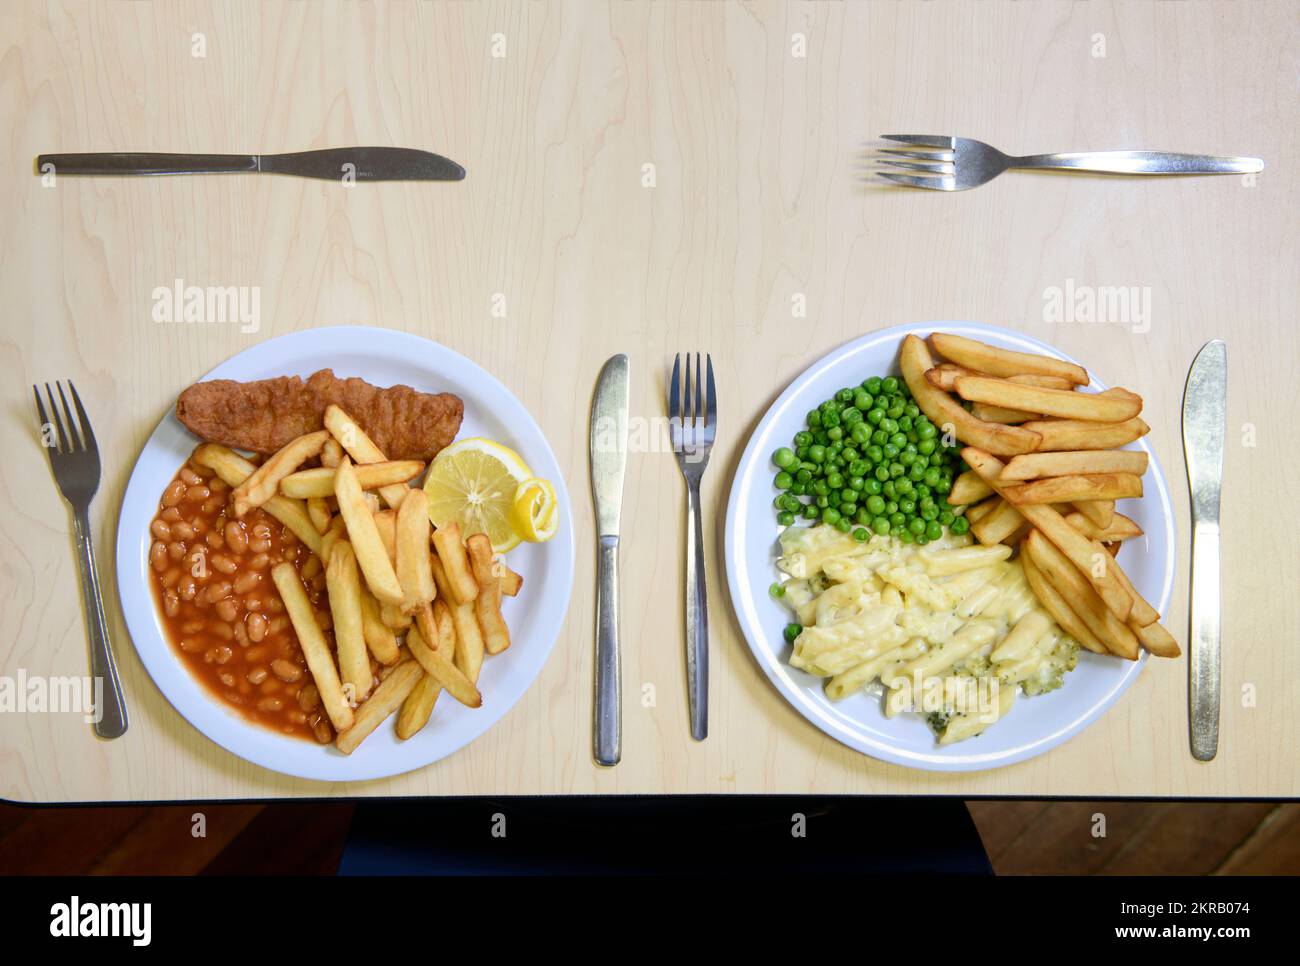 School dinners - fish & chips with peas and cheese & broccoli pasta with chips. Stock Photo